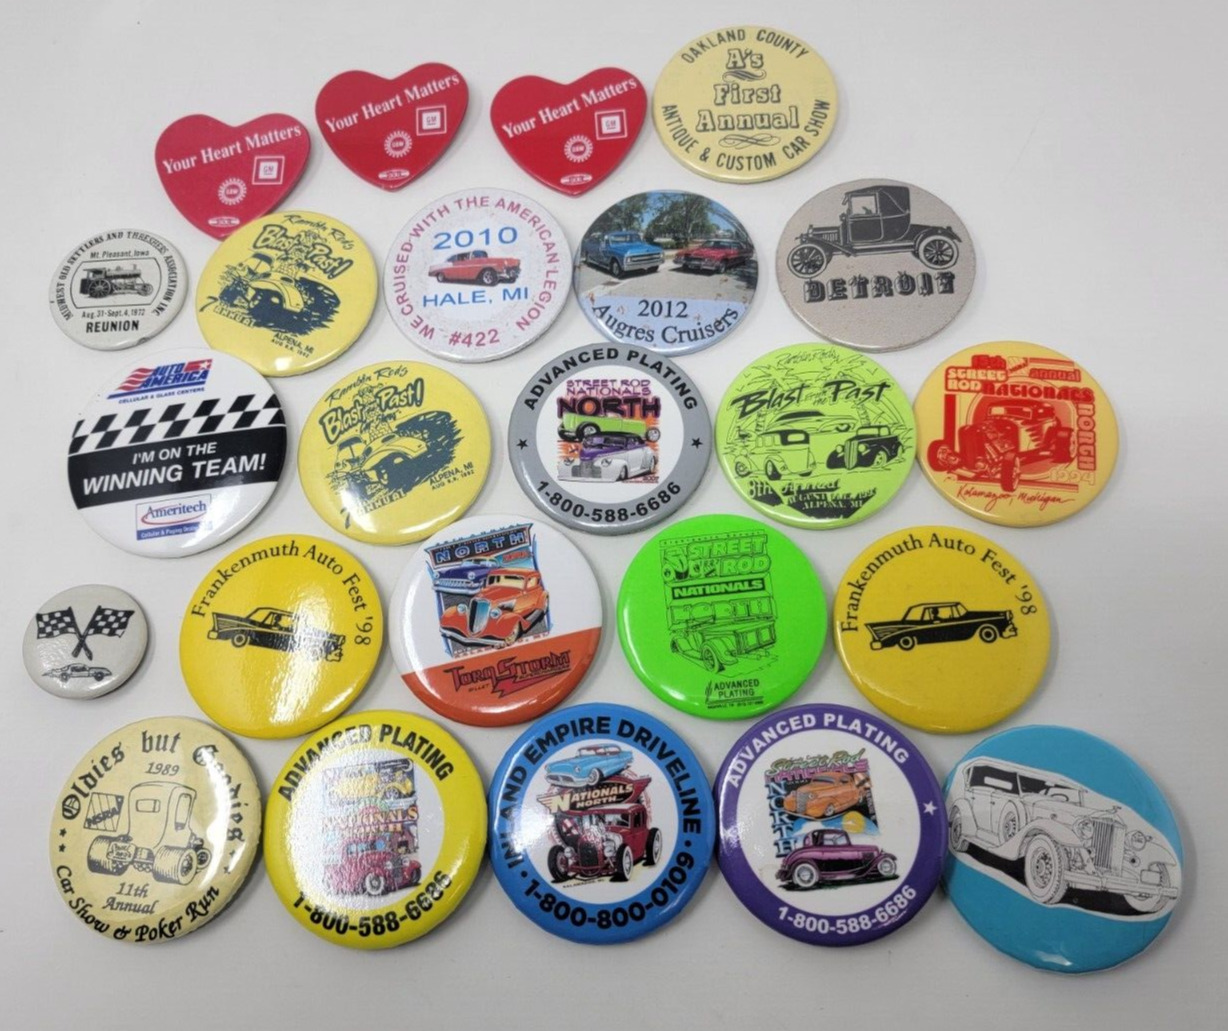 Vintage Lot of AUTO SHOW and CRUISE Buttons - Mostly Michigan